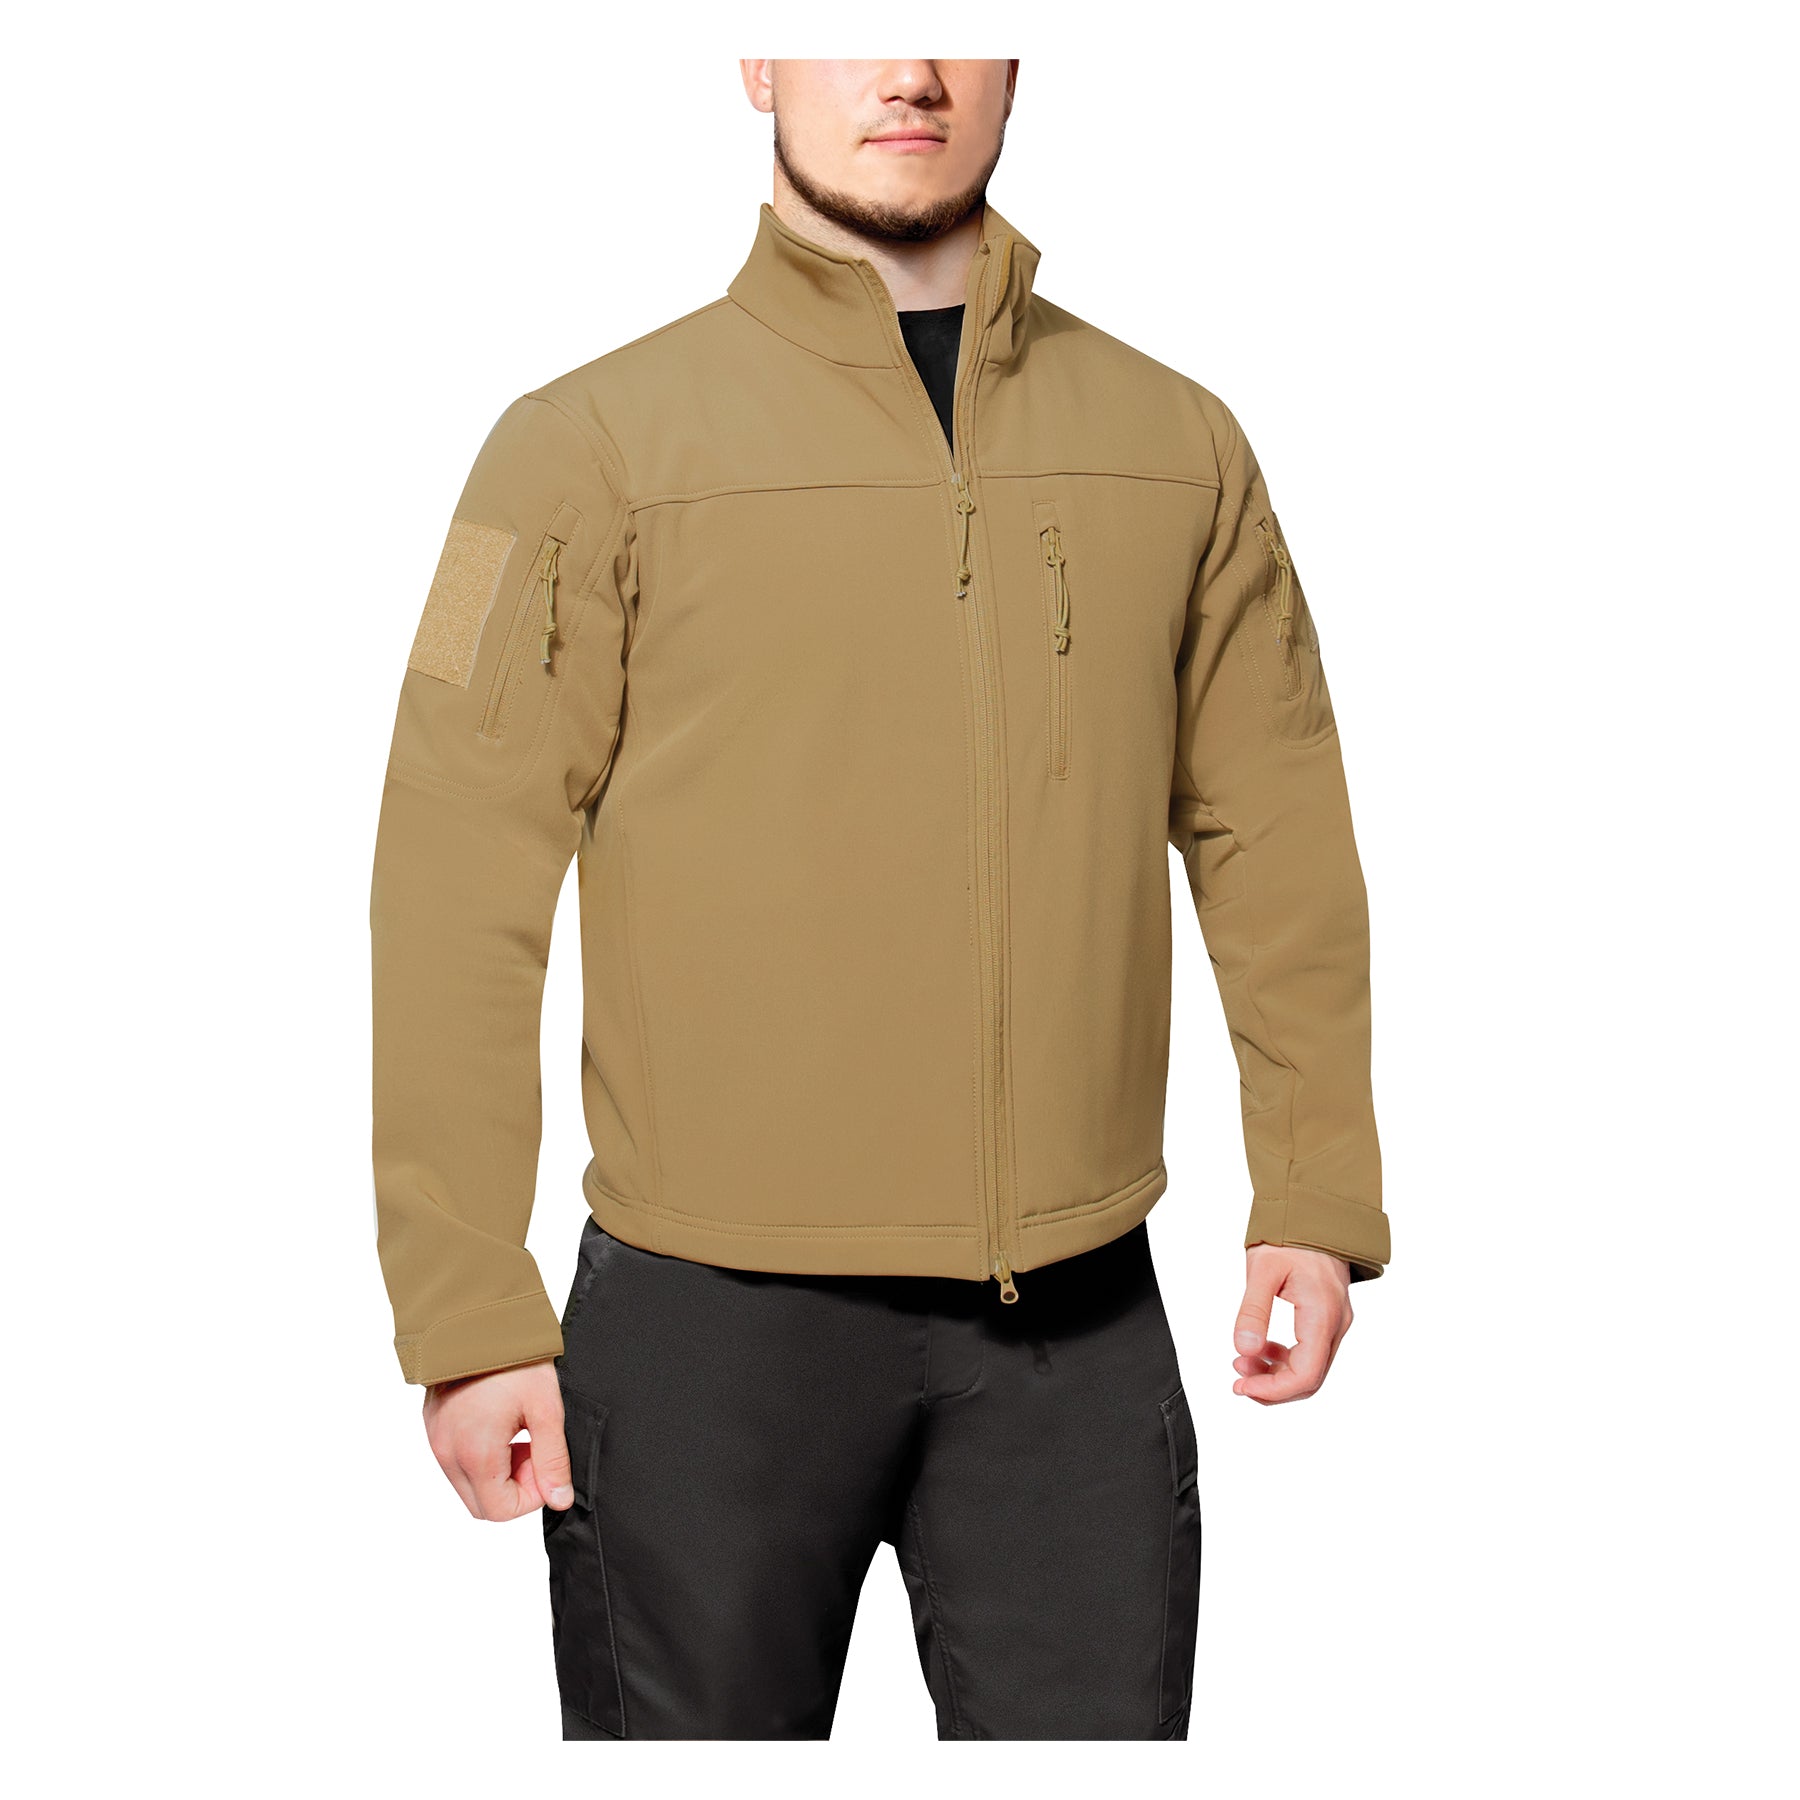 Poly Stealth Spec Ops Tactical Soft Shell Jackets Coyote Brown